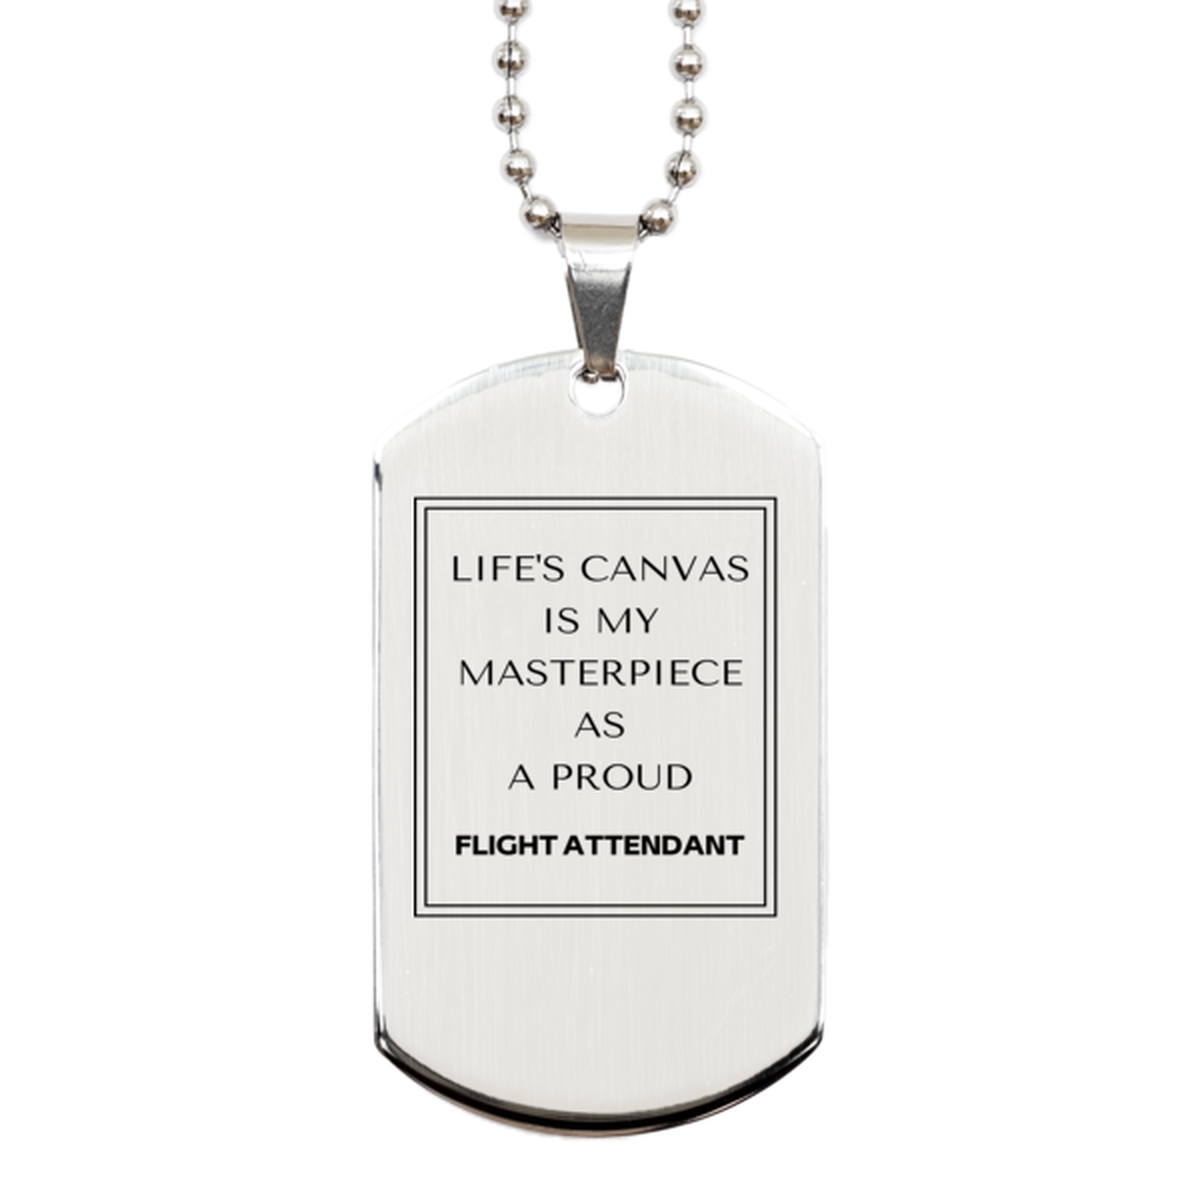 Proud Flight Attendant Gifts, Life's canvas is my masterpiece, Epic Birthday Christmas Unique Silver Dog Tag For Flight Attendant, Coworkers, Men, Women, Friends